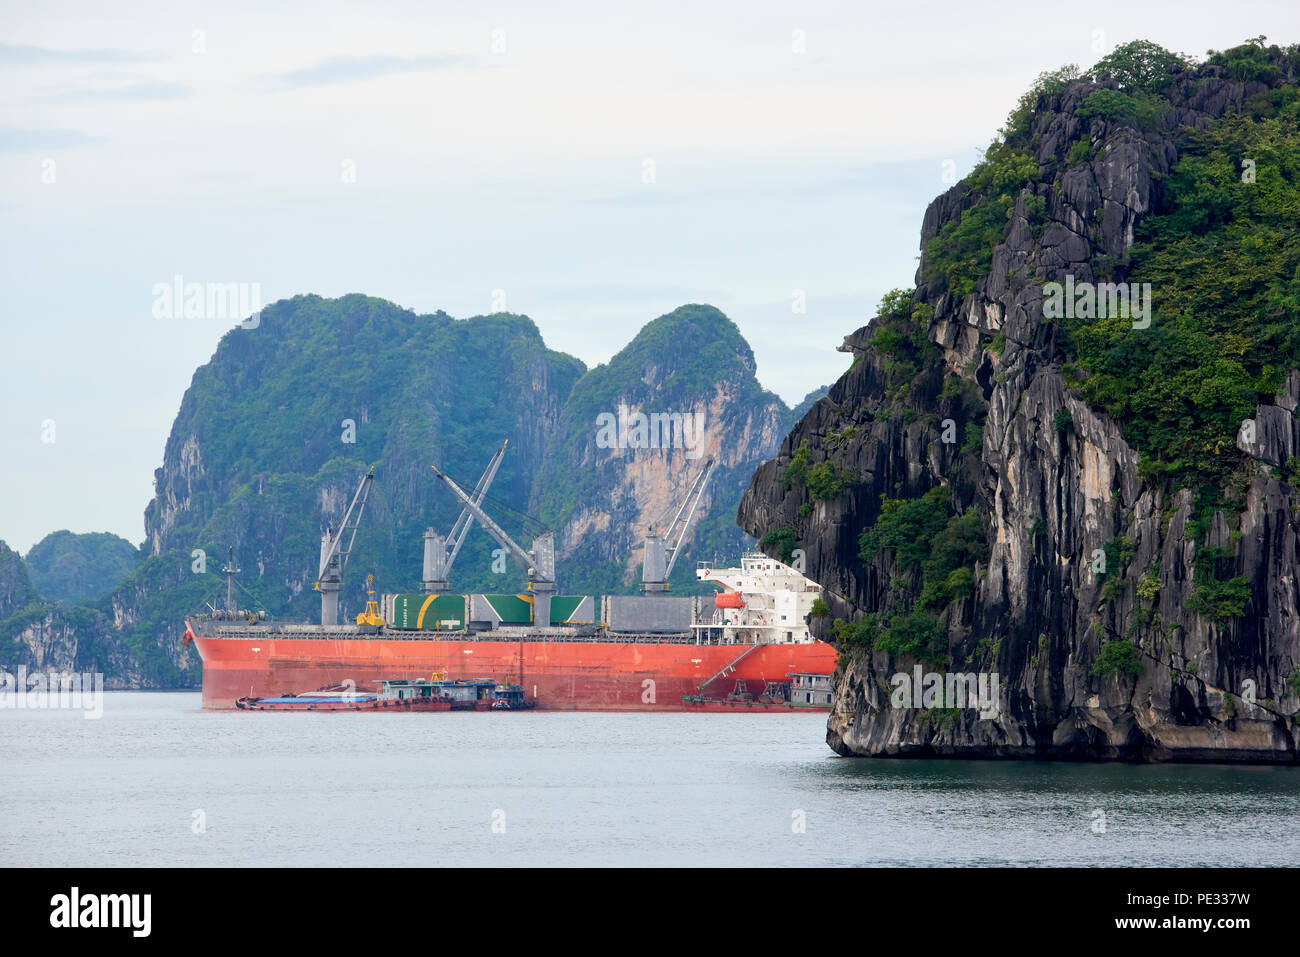 Mountain Halong Bay, North Vietnam, with industrial transport ship in the background. The islet resembles a human face in profile when seen from the s Stock Photo